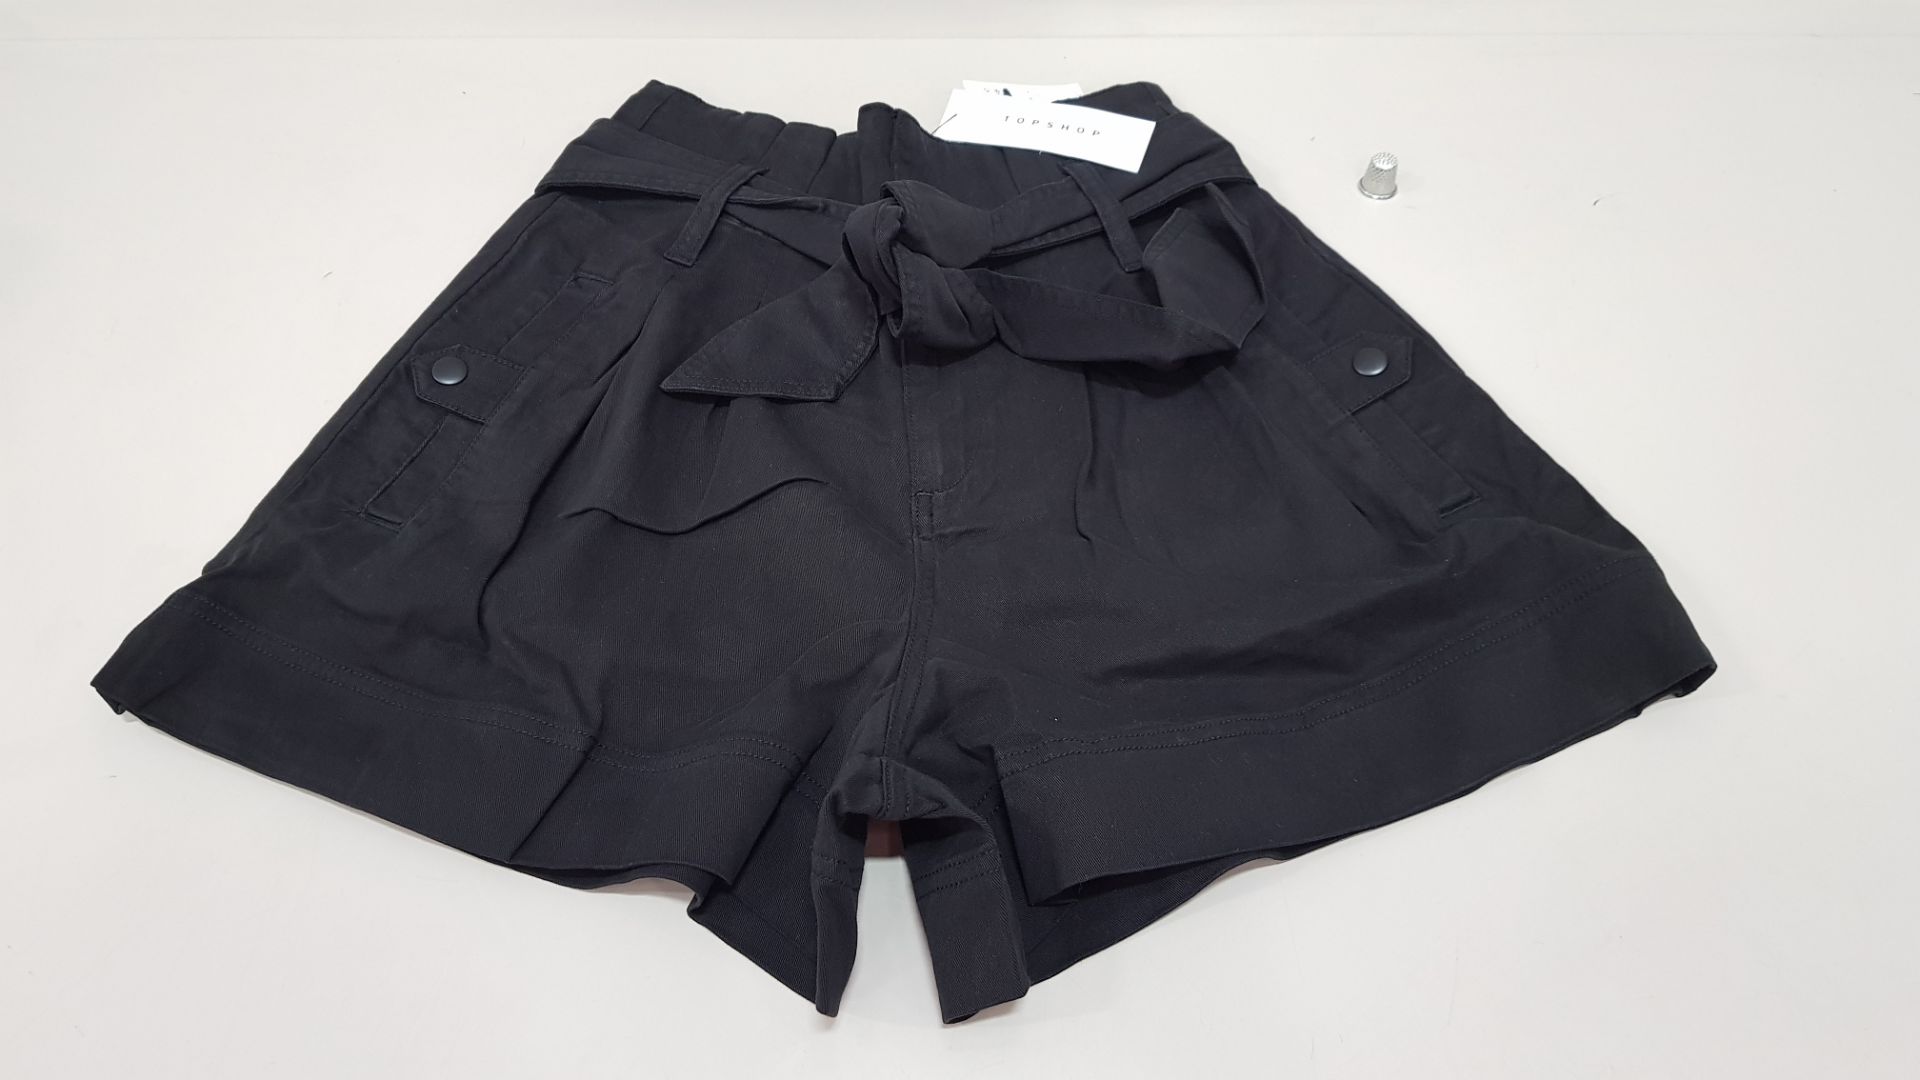 15 X BRAND NEW TOPSHOP SHORTS UK SIZE 6 RRP £29.00 (TOTAL RRP £435.00)